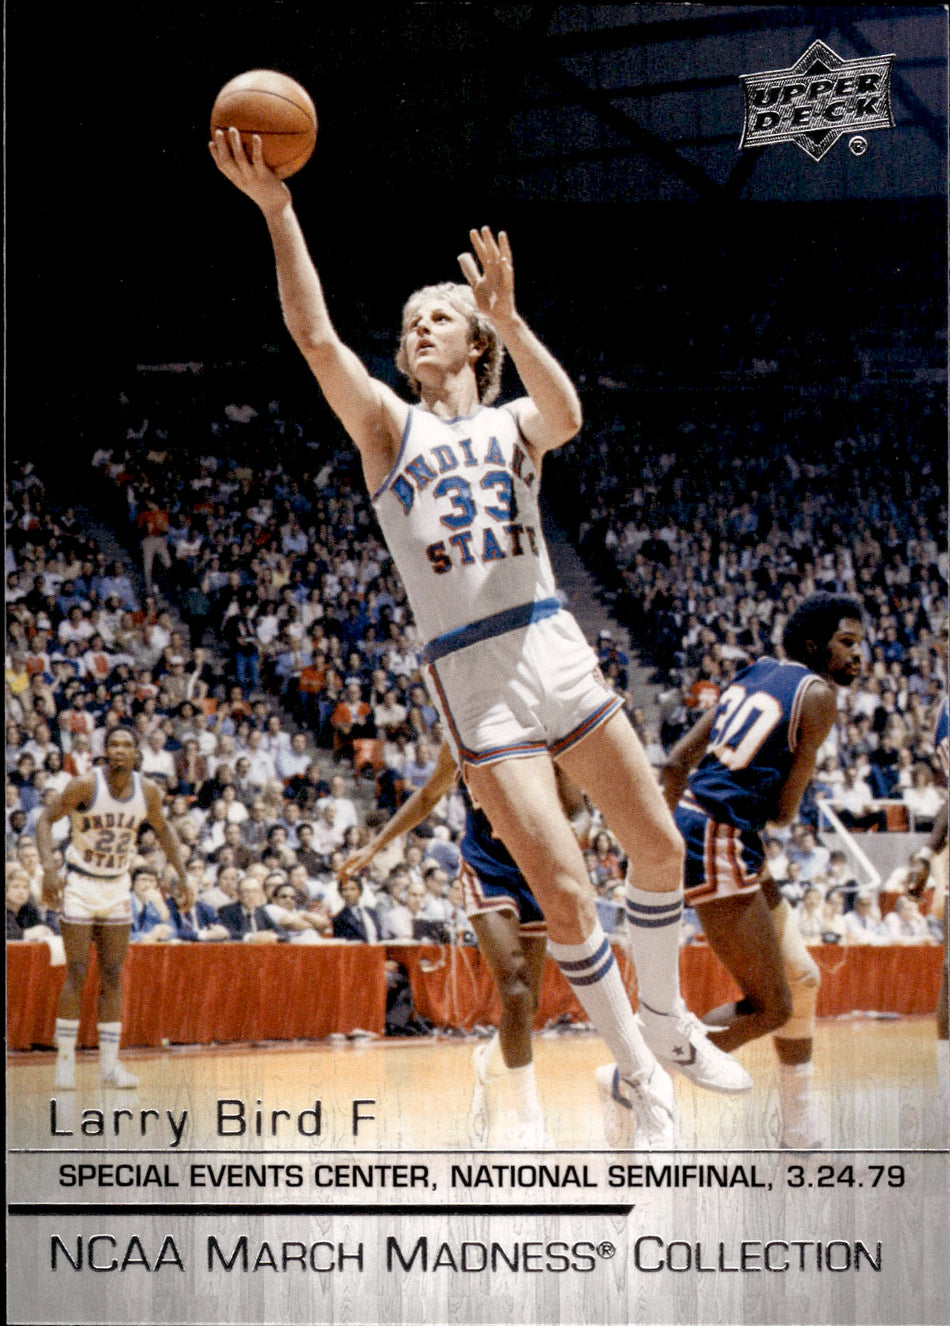 LARRY BIRD 2014 UPPER DECK MARCH MADNESS COLLECTION NO. LB-2